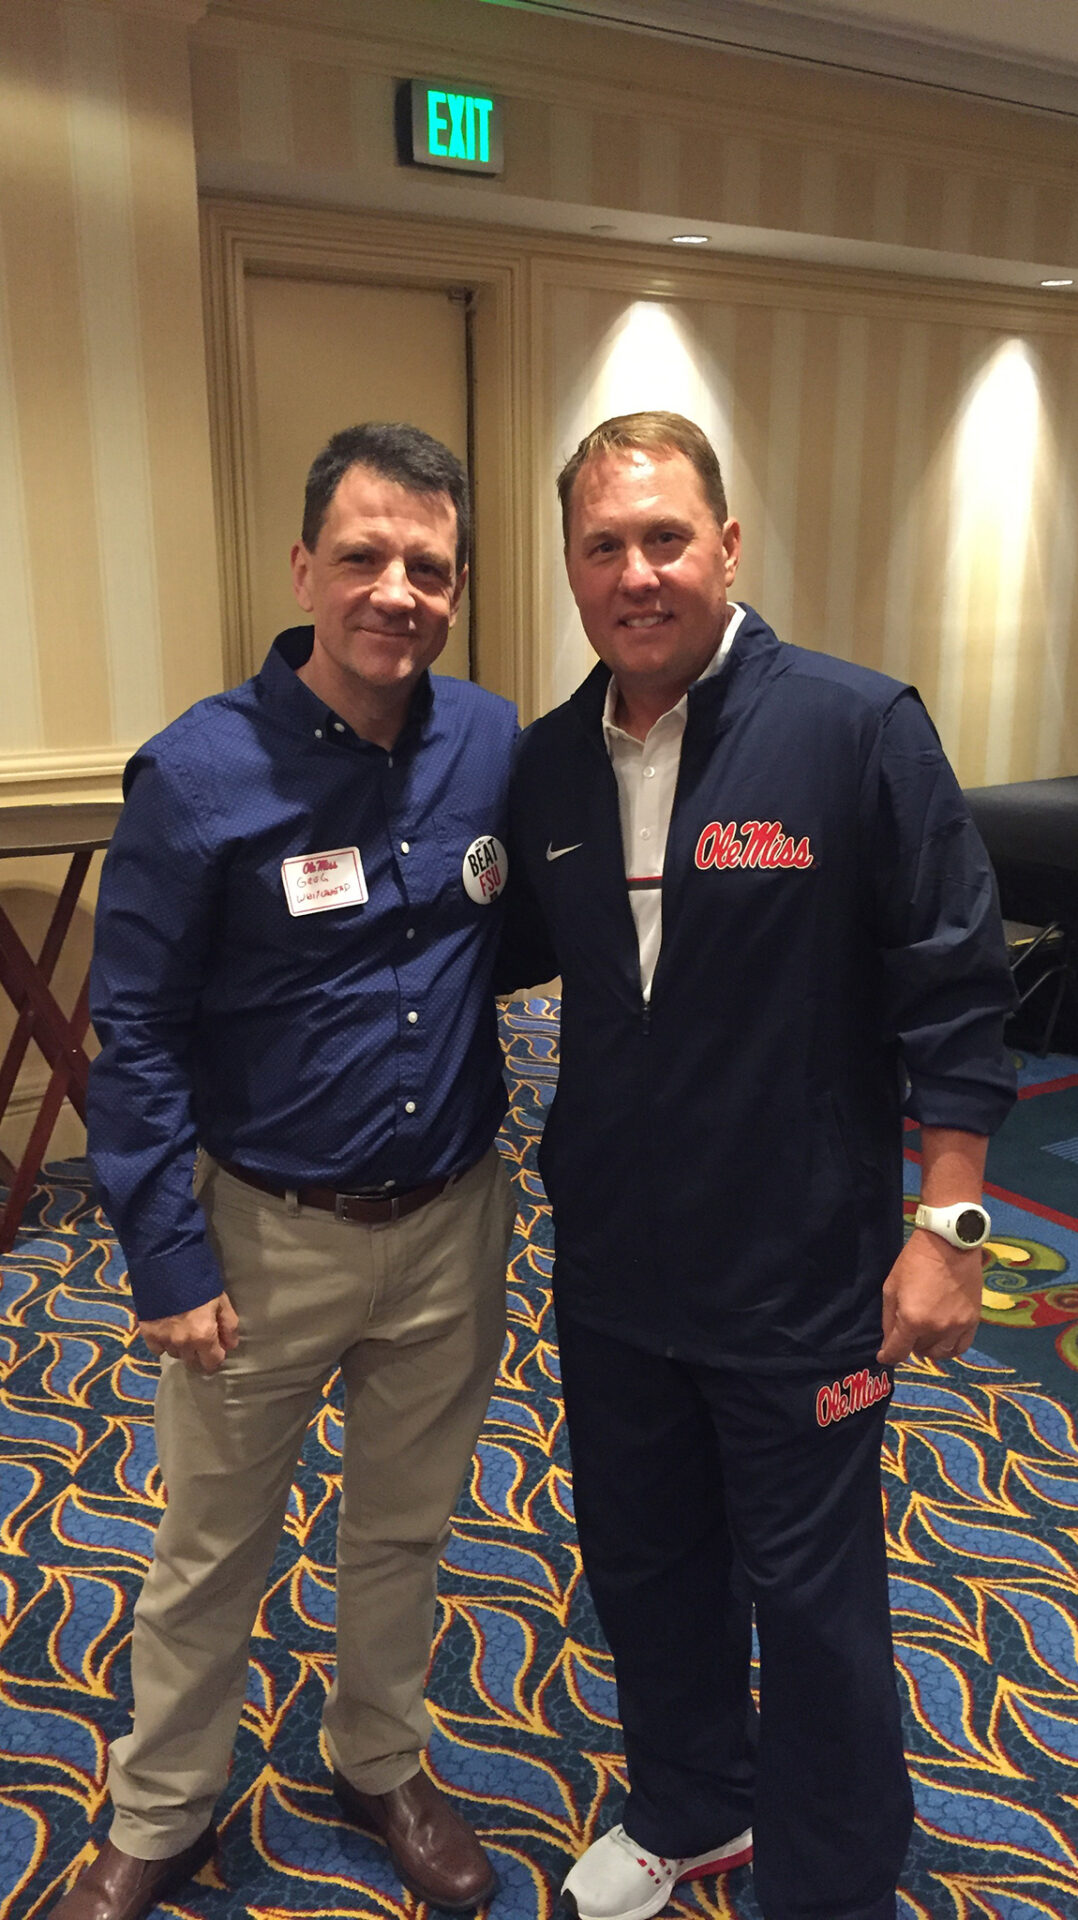 UM alumnus Greg Whitehead, left, meets with football Coach Hugh Freeze. Whitehead has established an endowment to provide ongoing scholarships for Ole Miss student-athletes. Courtesy photo